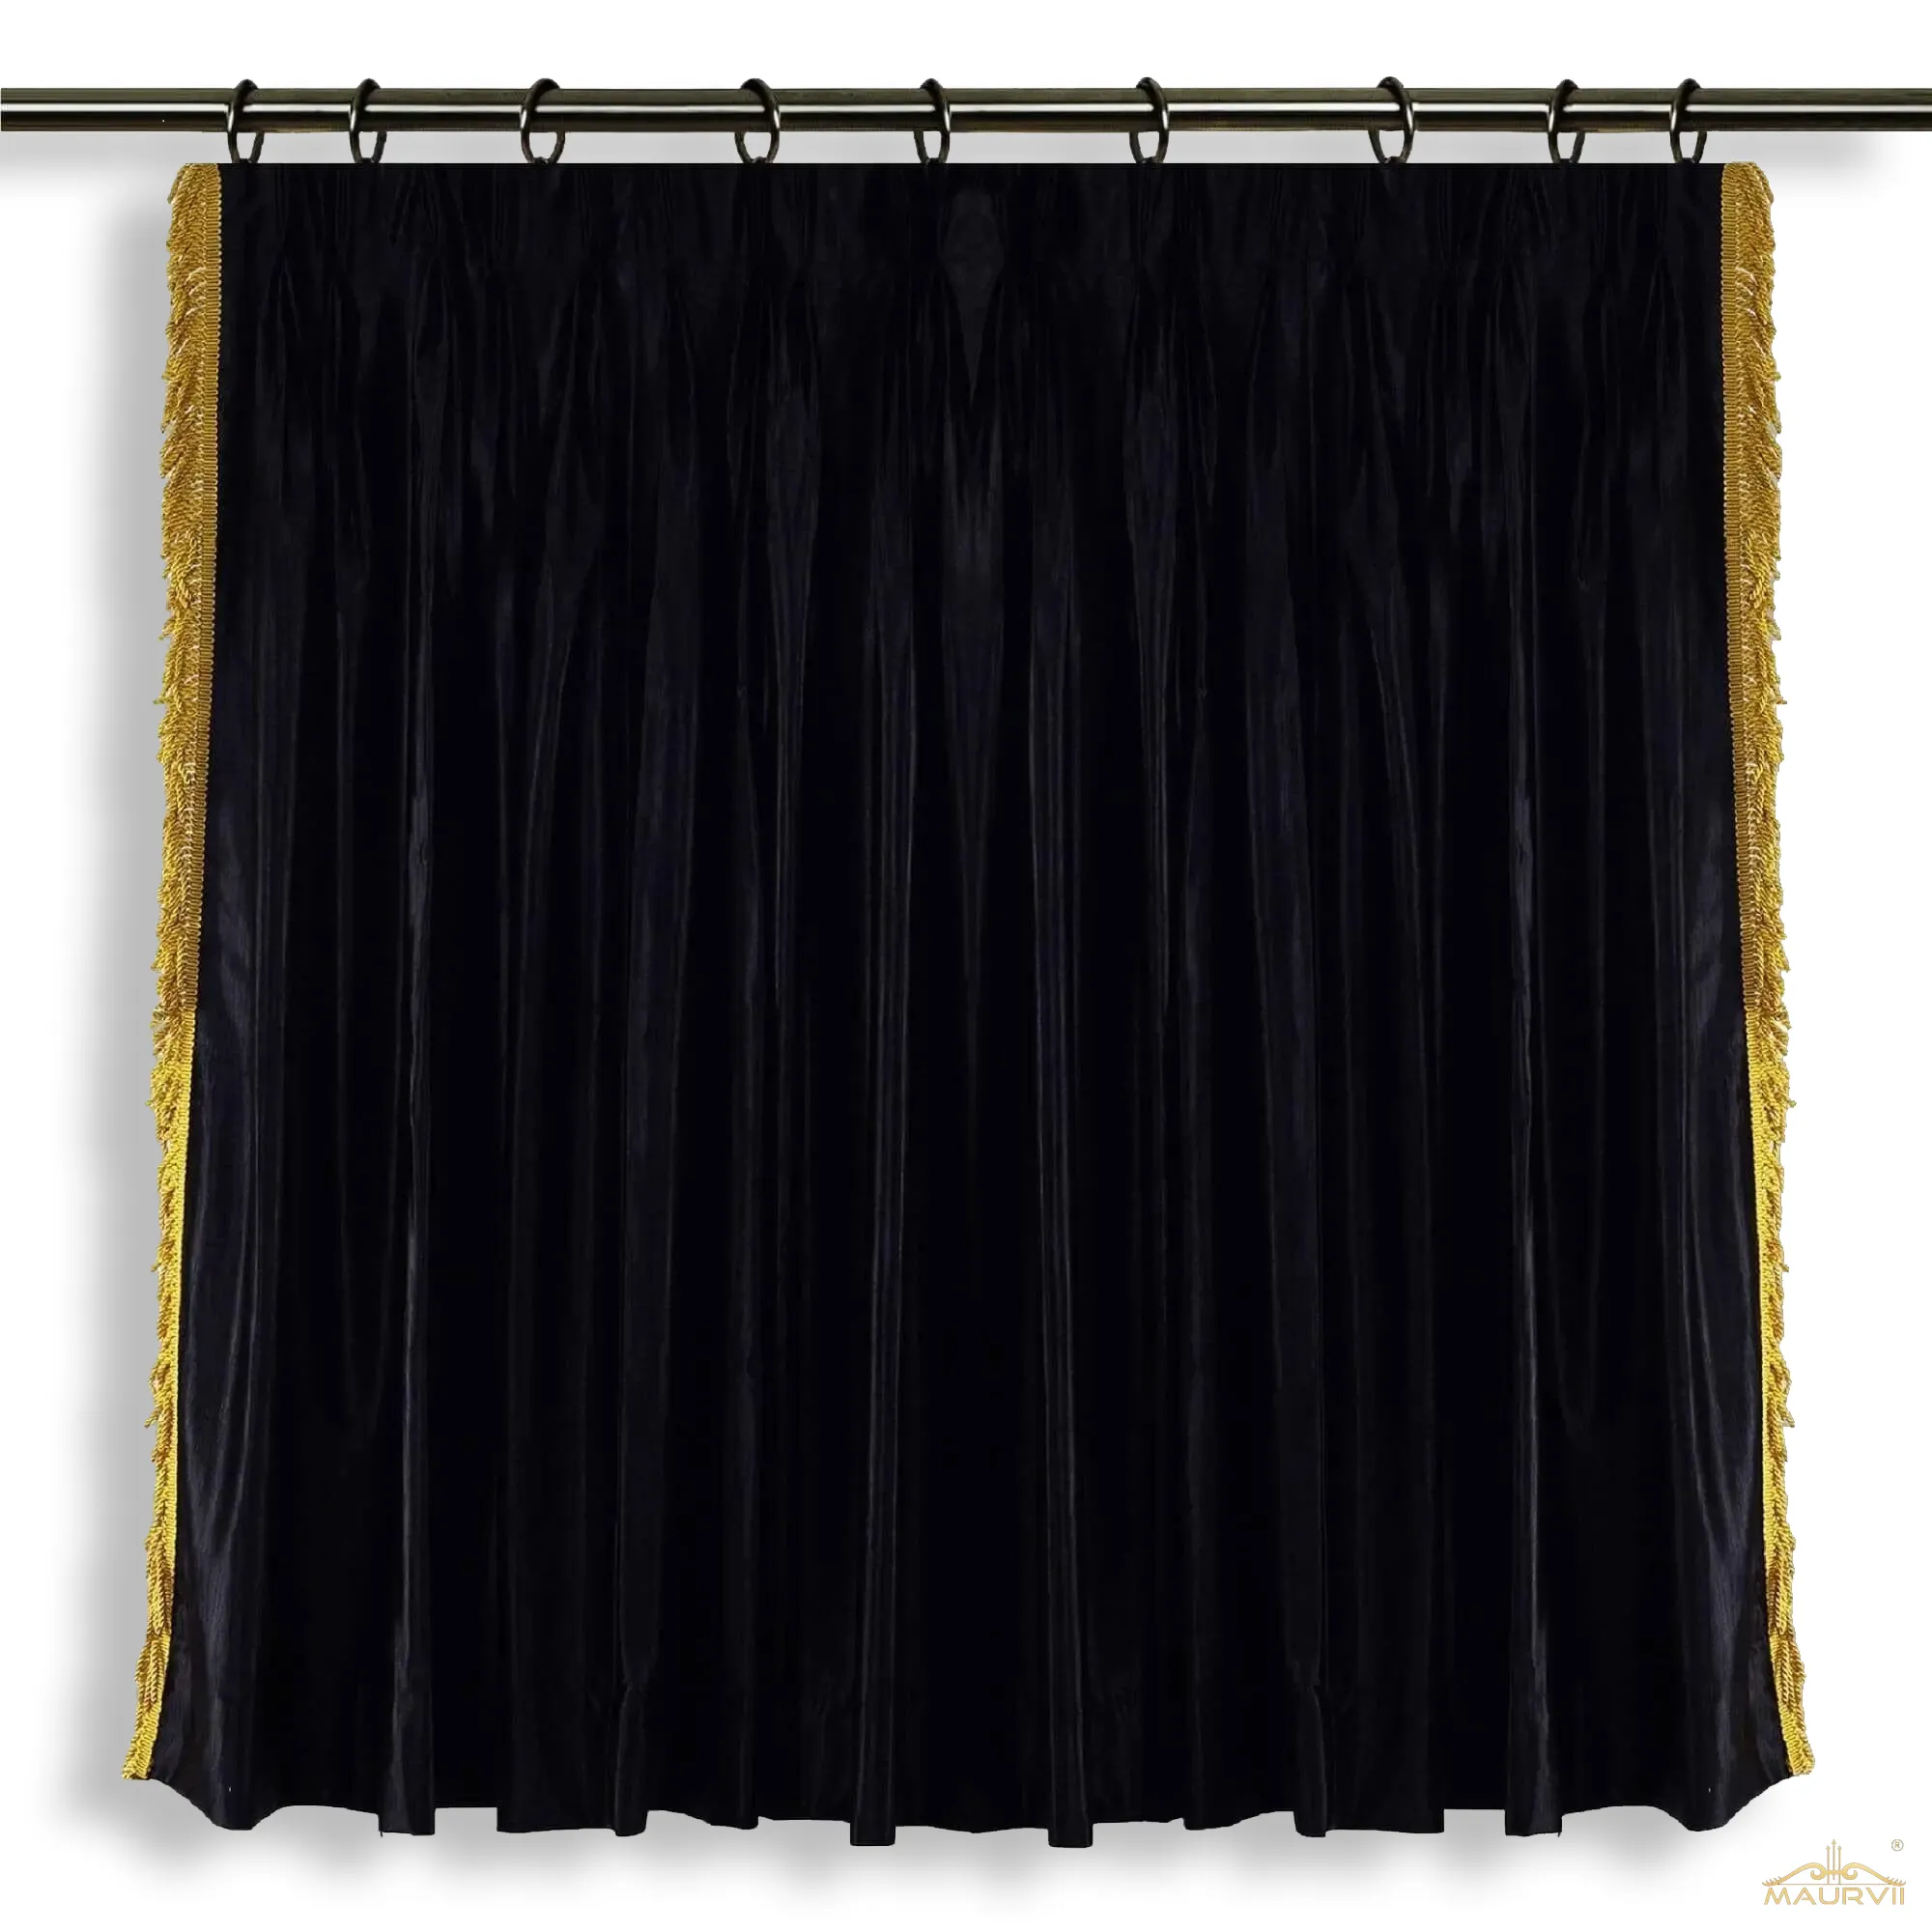 Black lace curtains with golden fringe